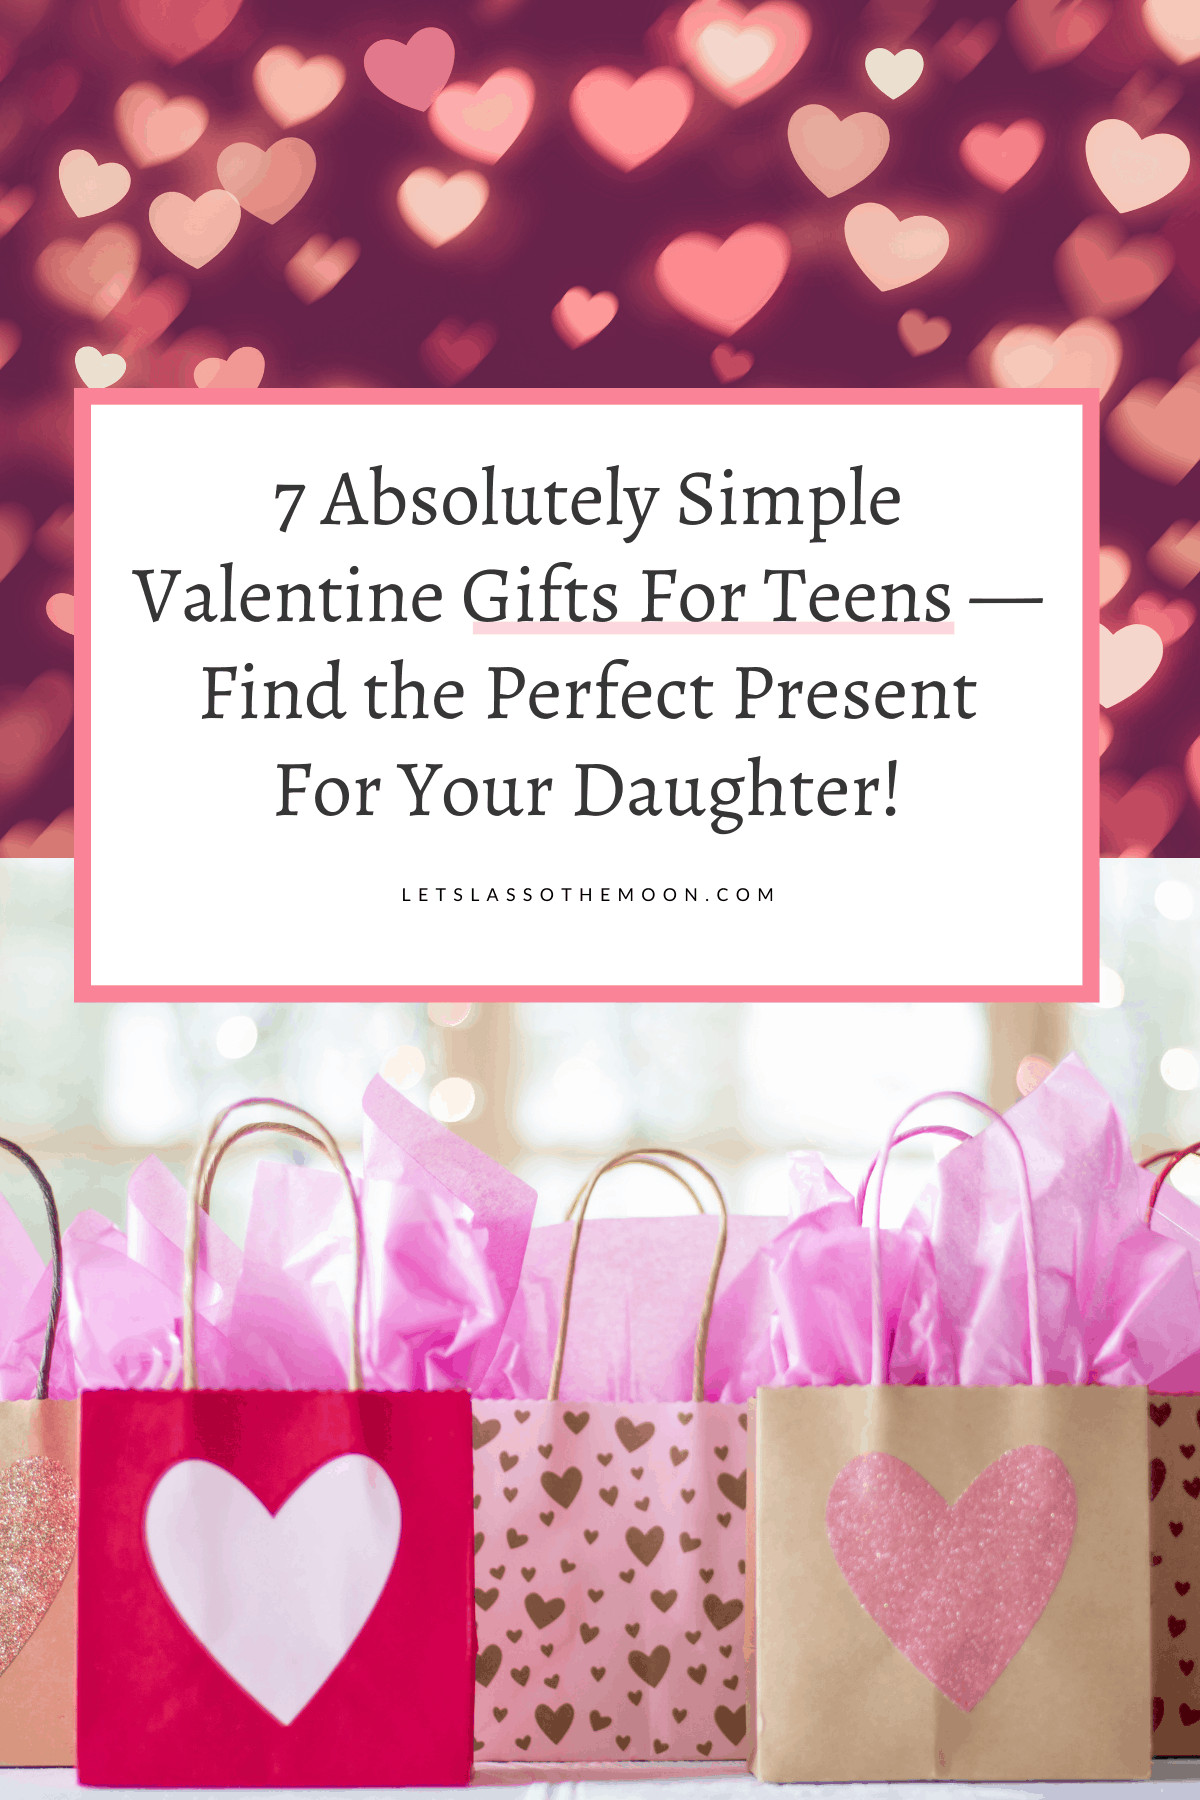 7 Absolutely Simple Valentine Gifts For Teens — Find the Perfect Present